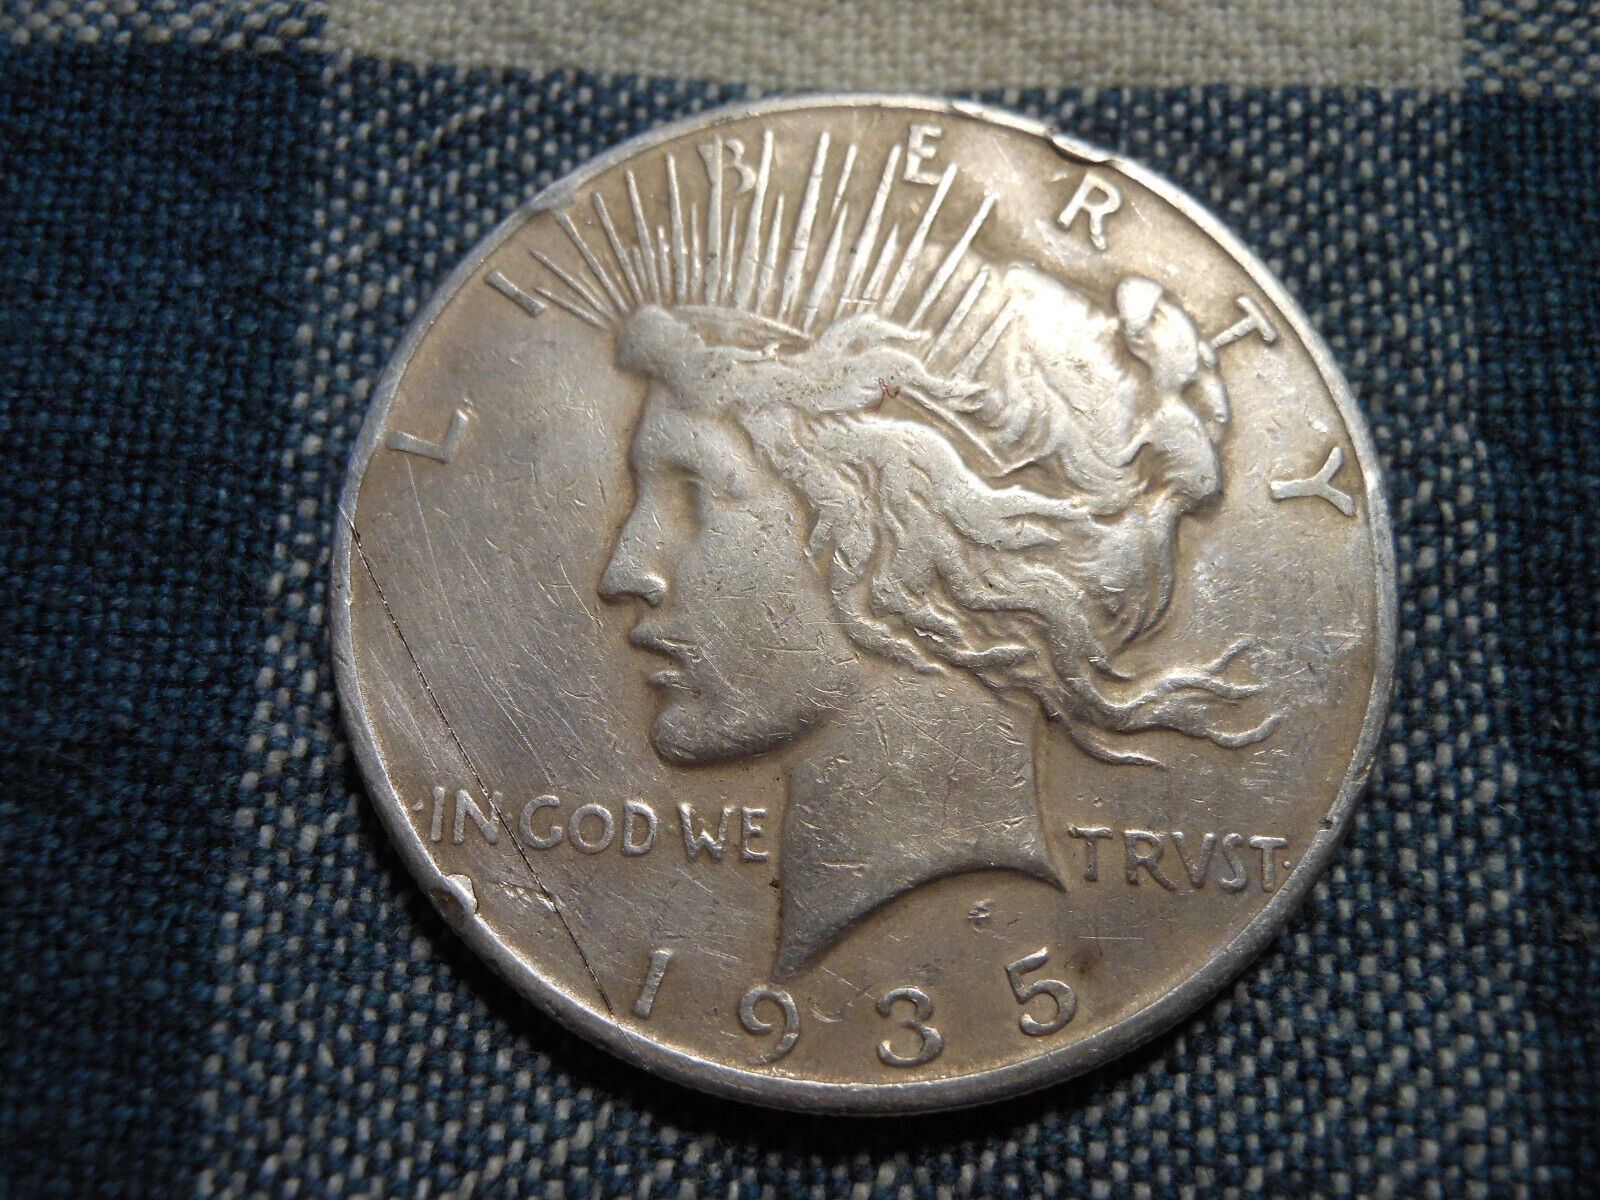 Primary image for 1935-S PEACE 90% SILVER DOLLAR RAW CIRCULATED